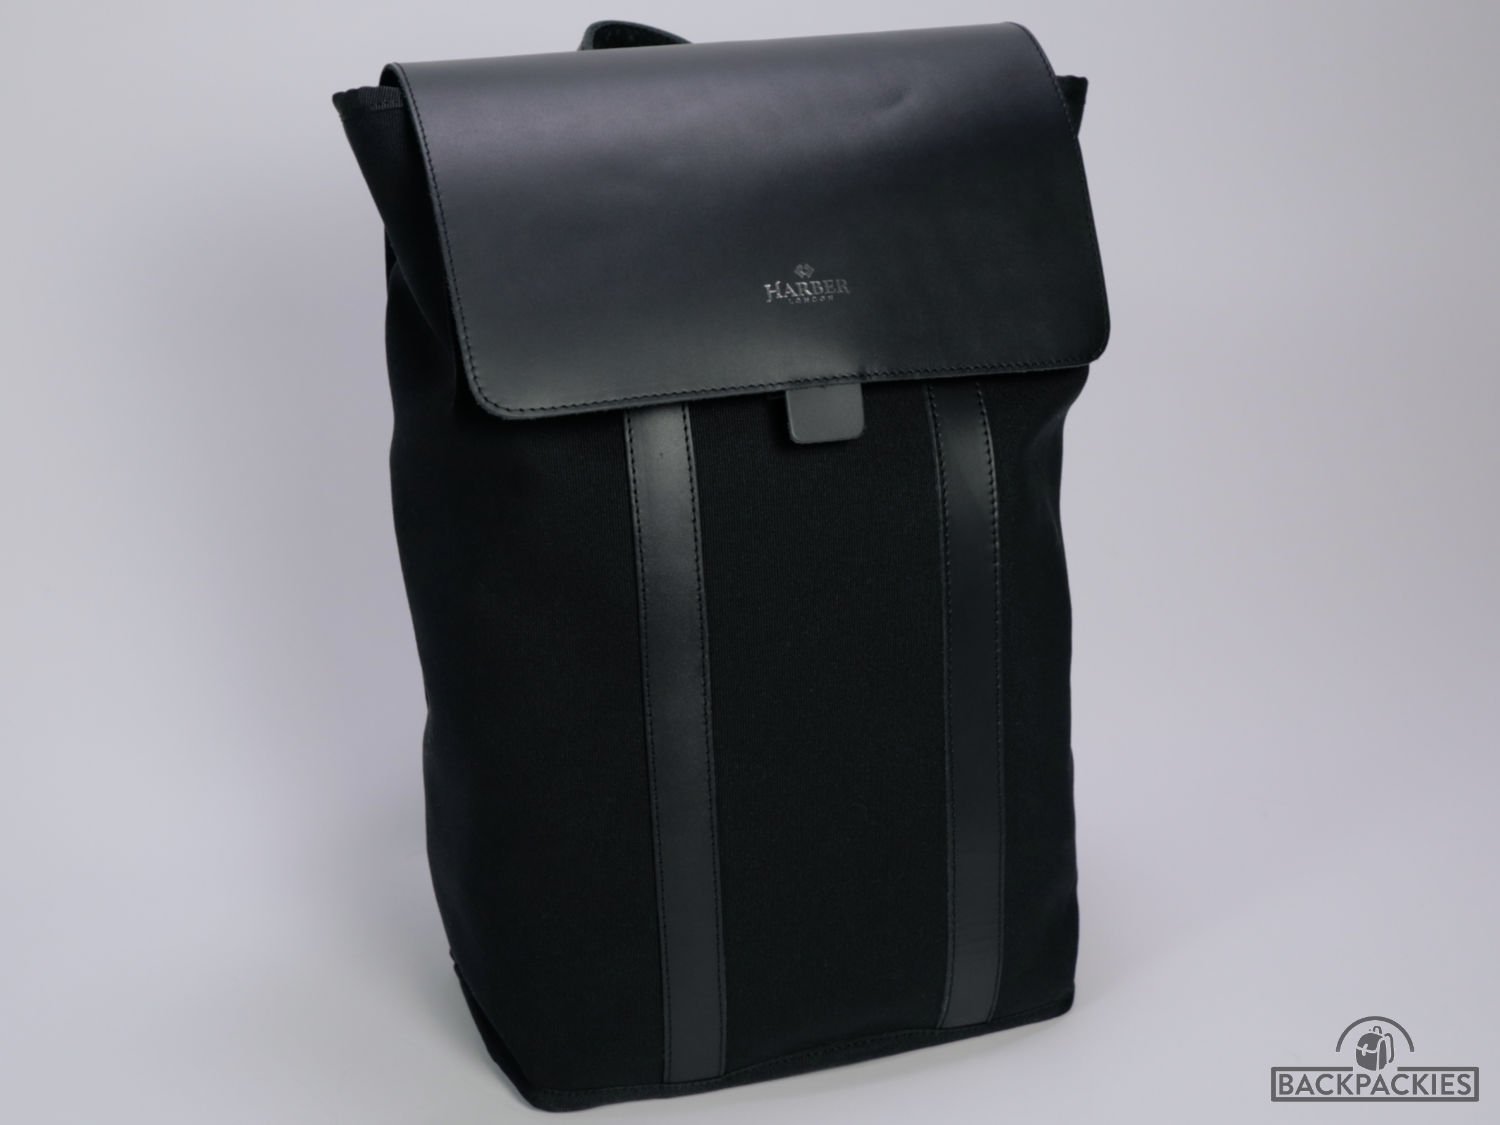 Harber London Commuter Backpack Review